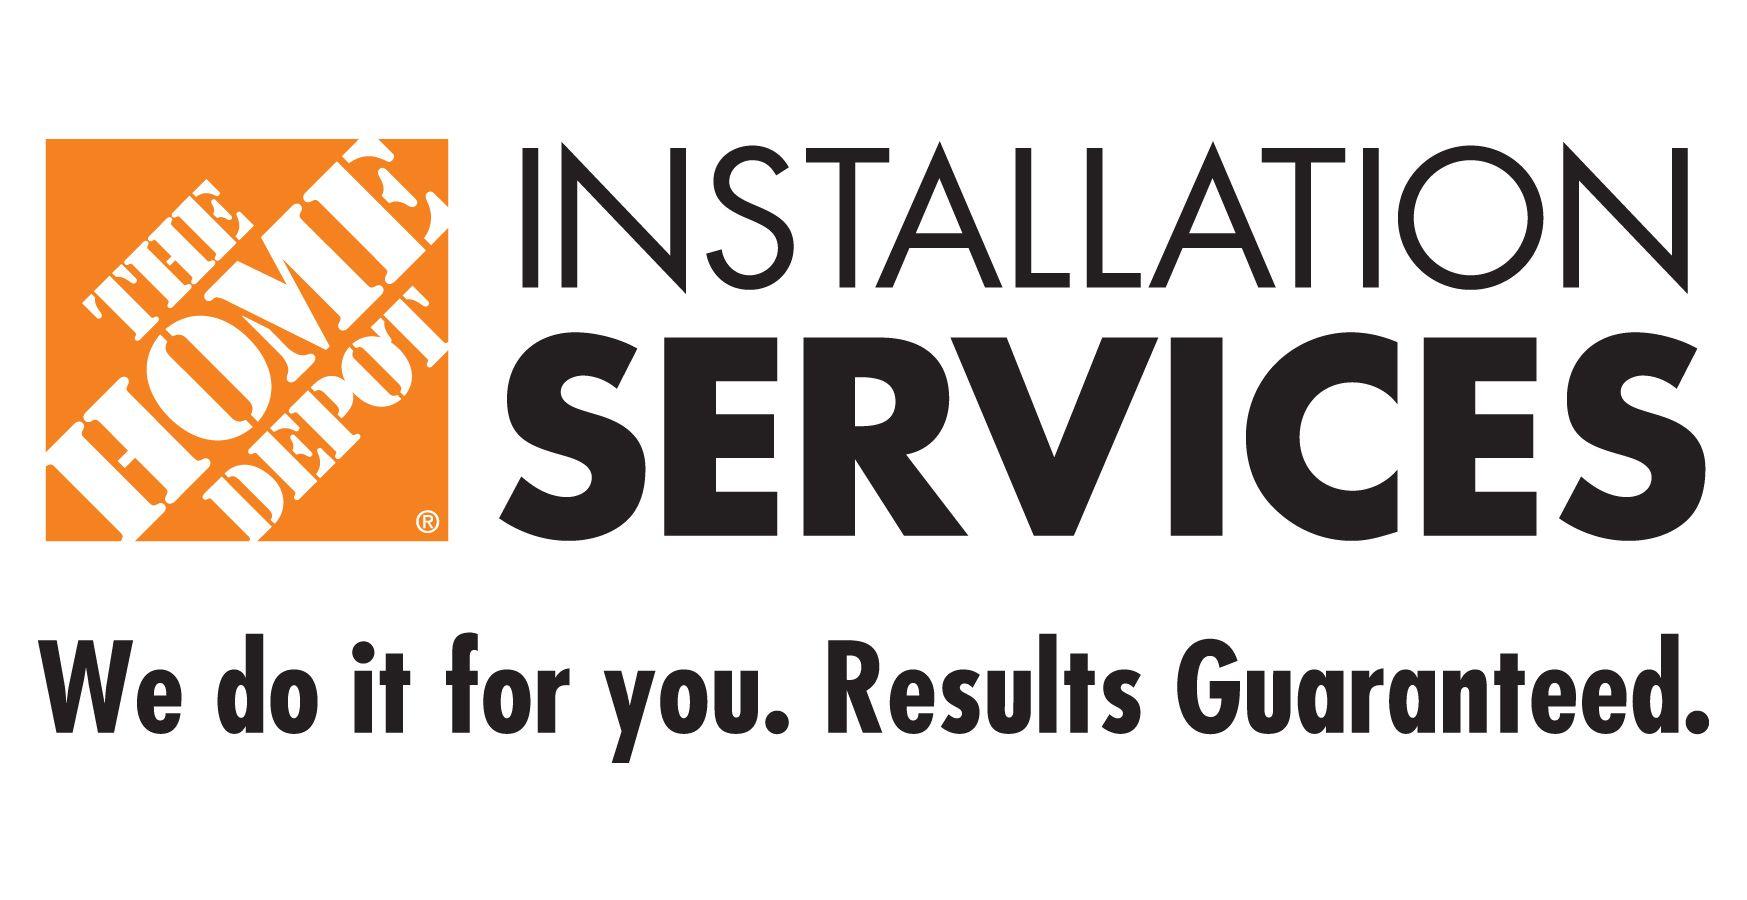 Home Depot Home Services Logo - Installation Services